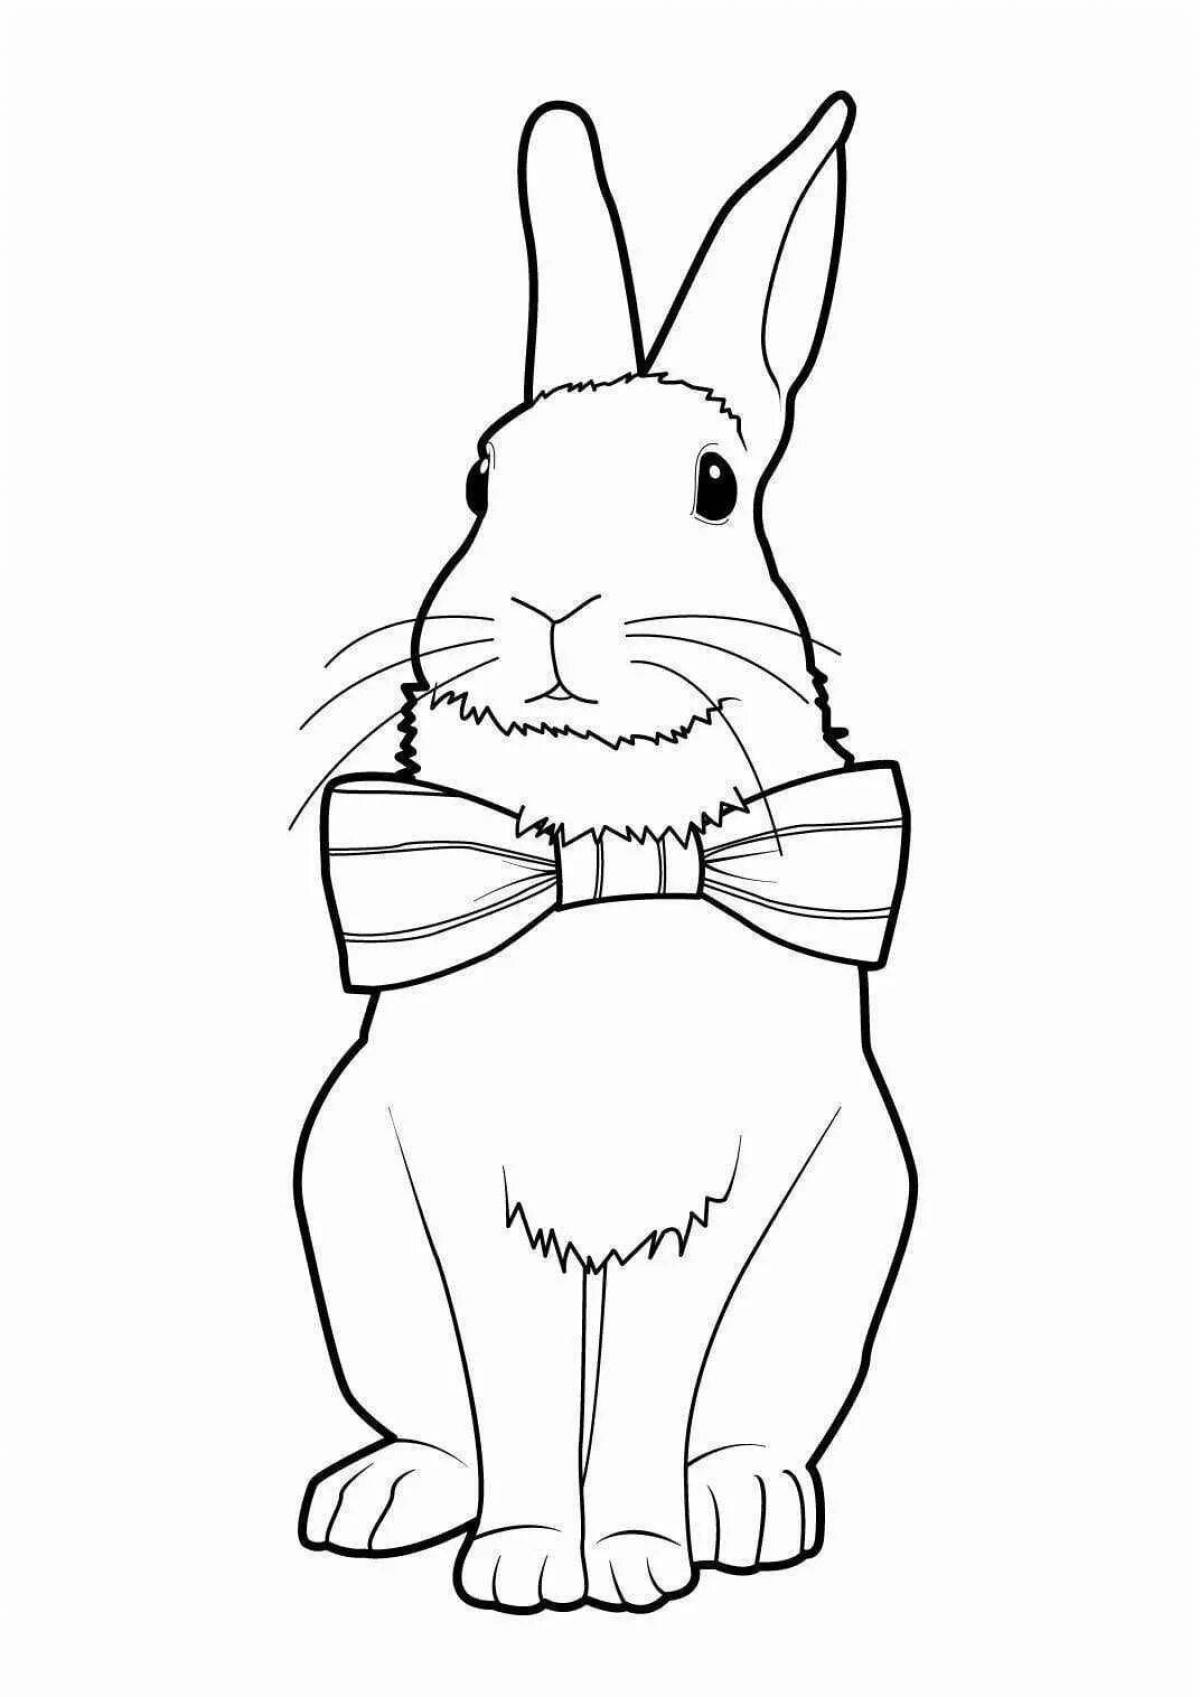 Bunny bunny colorful coloring book